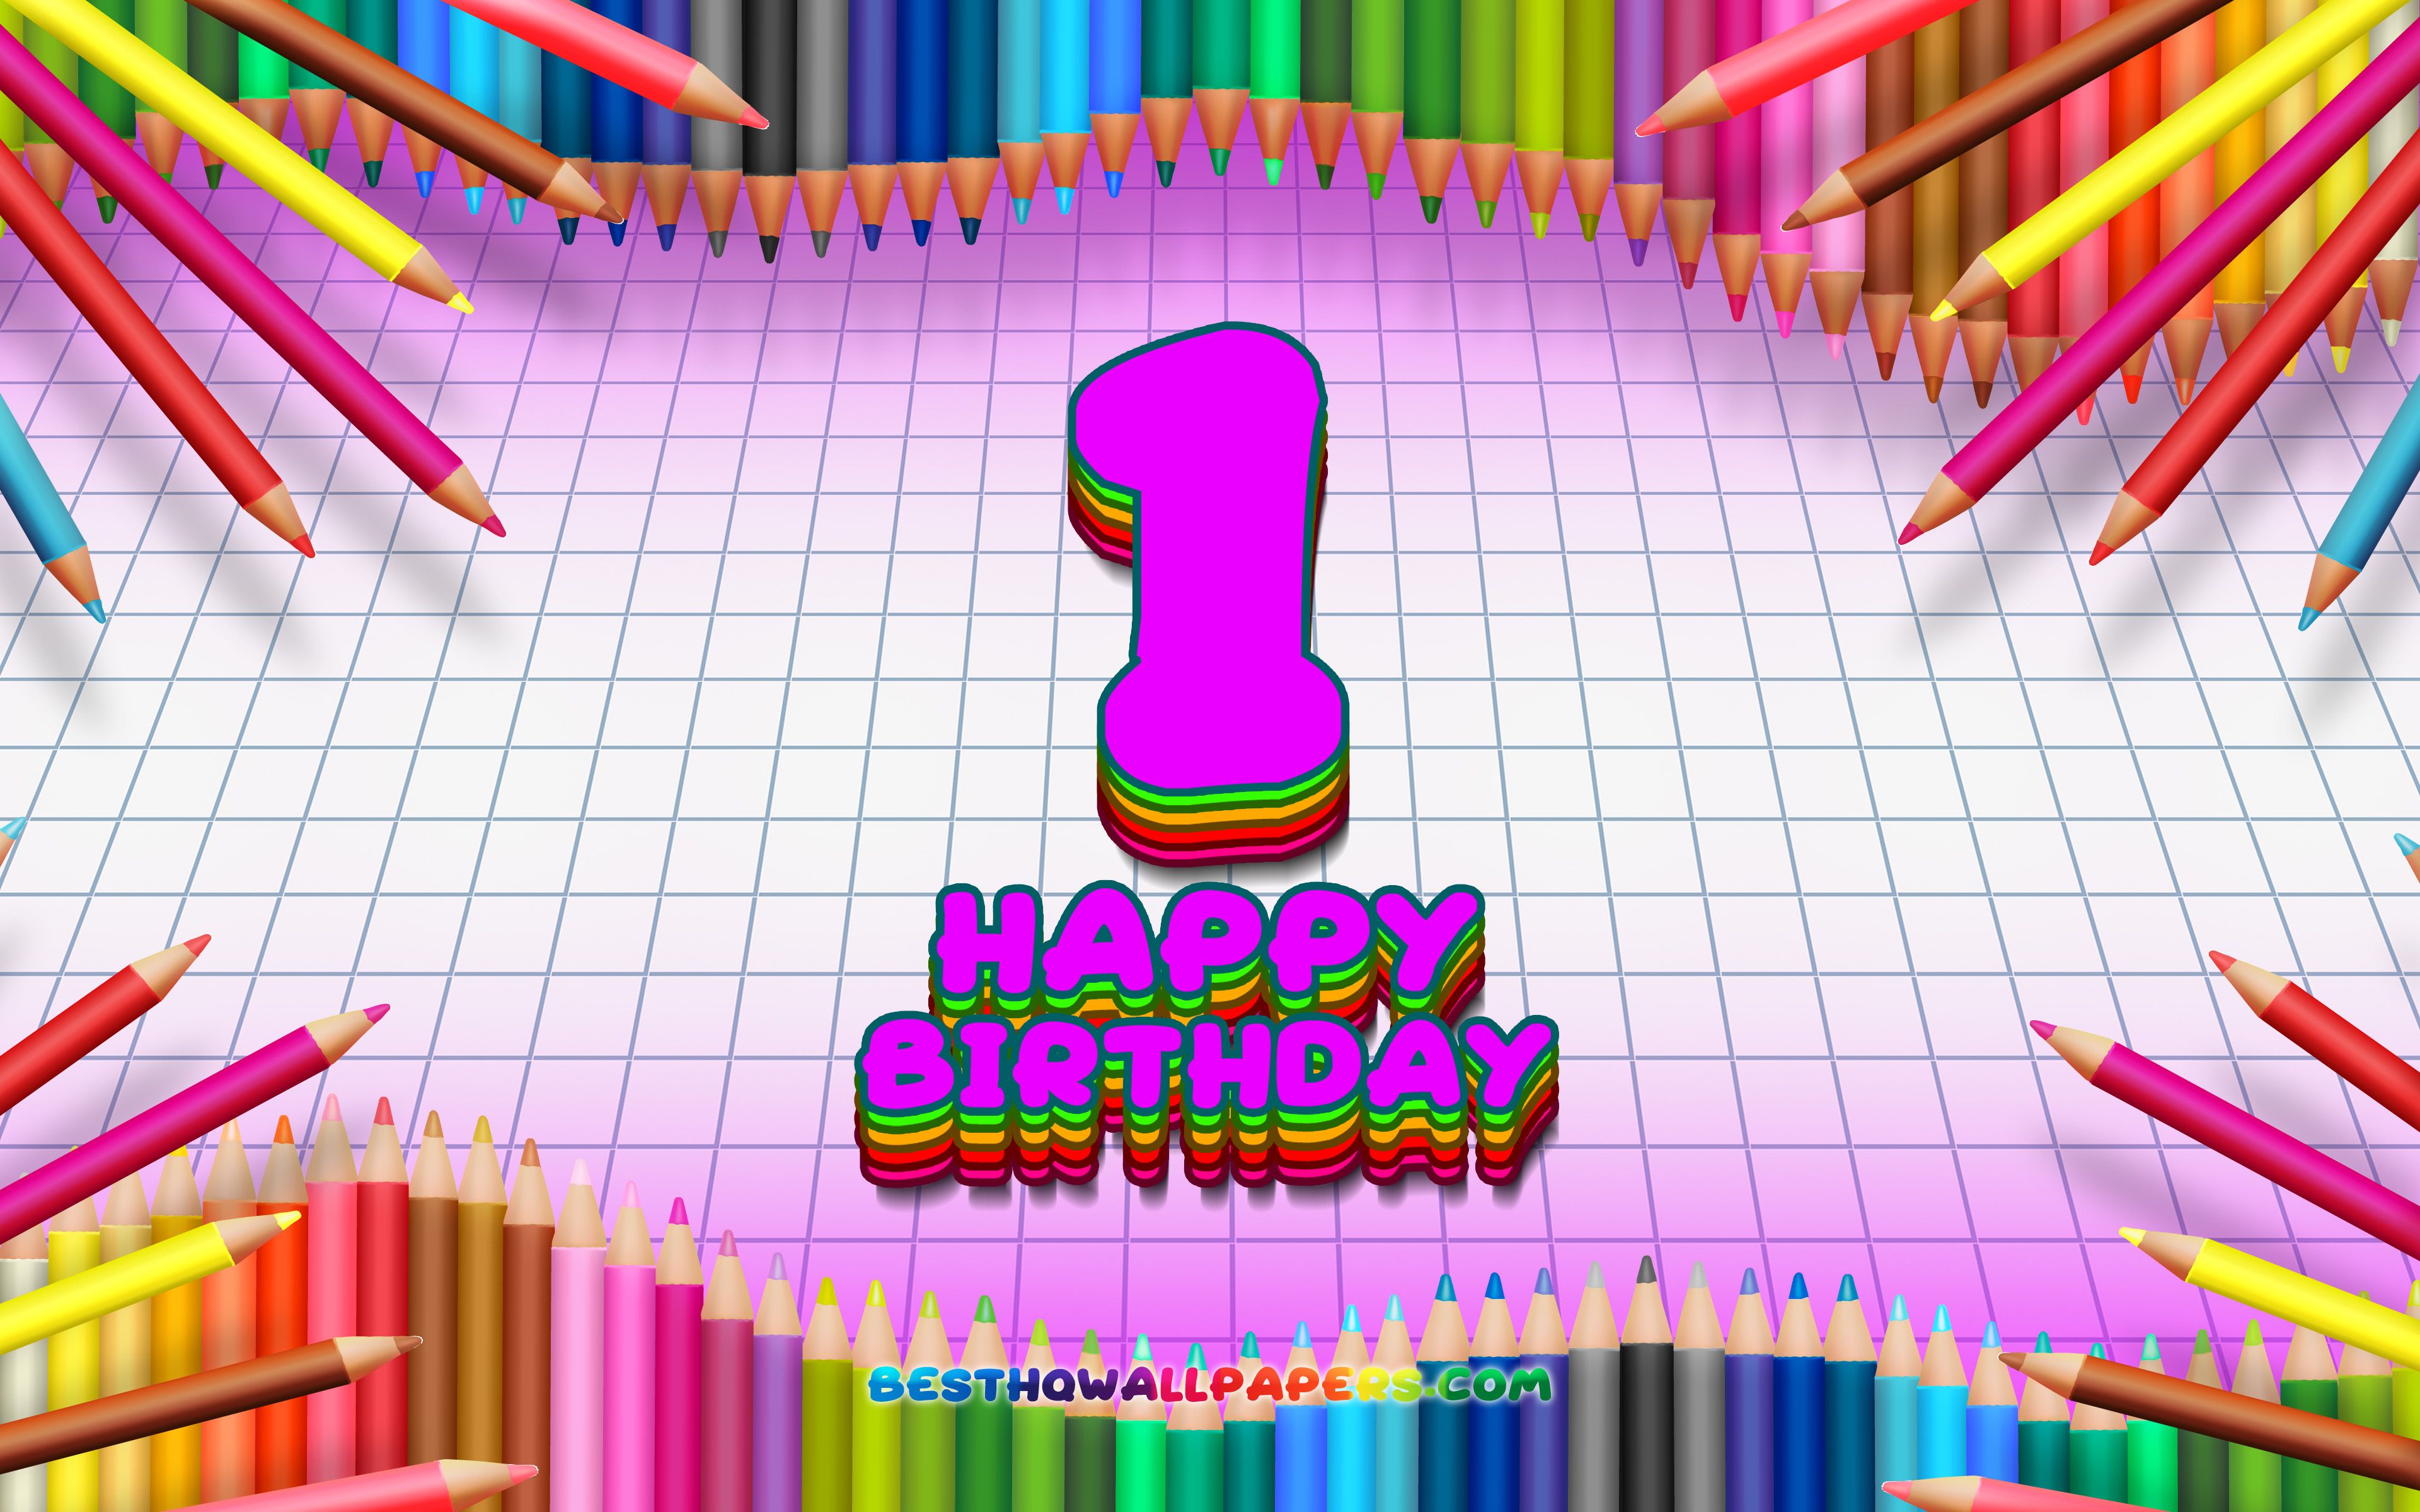 Download wallpaper 4k, Happy 1st birthday, colorful pencils frame